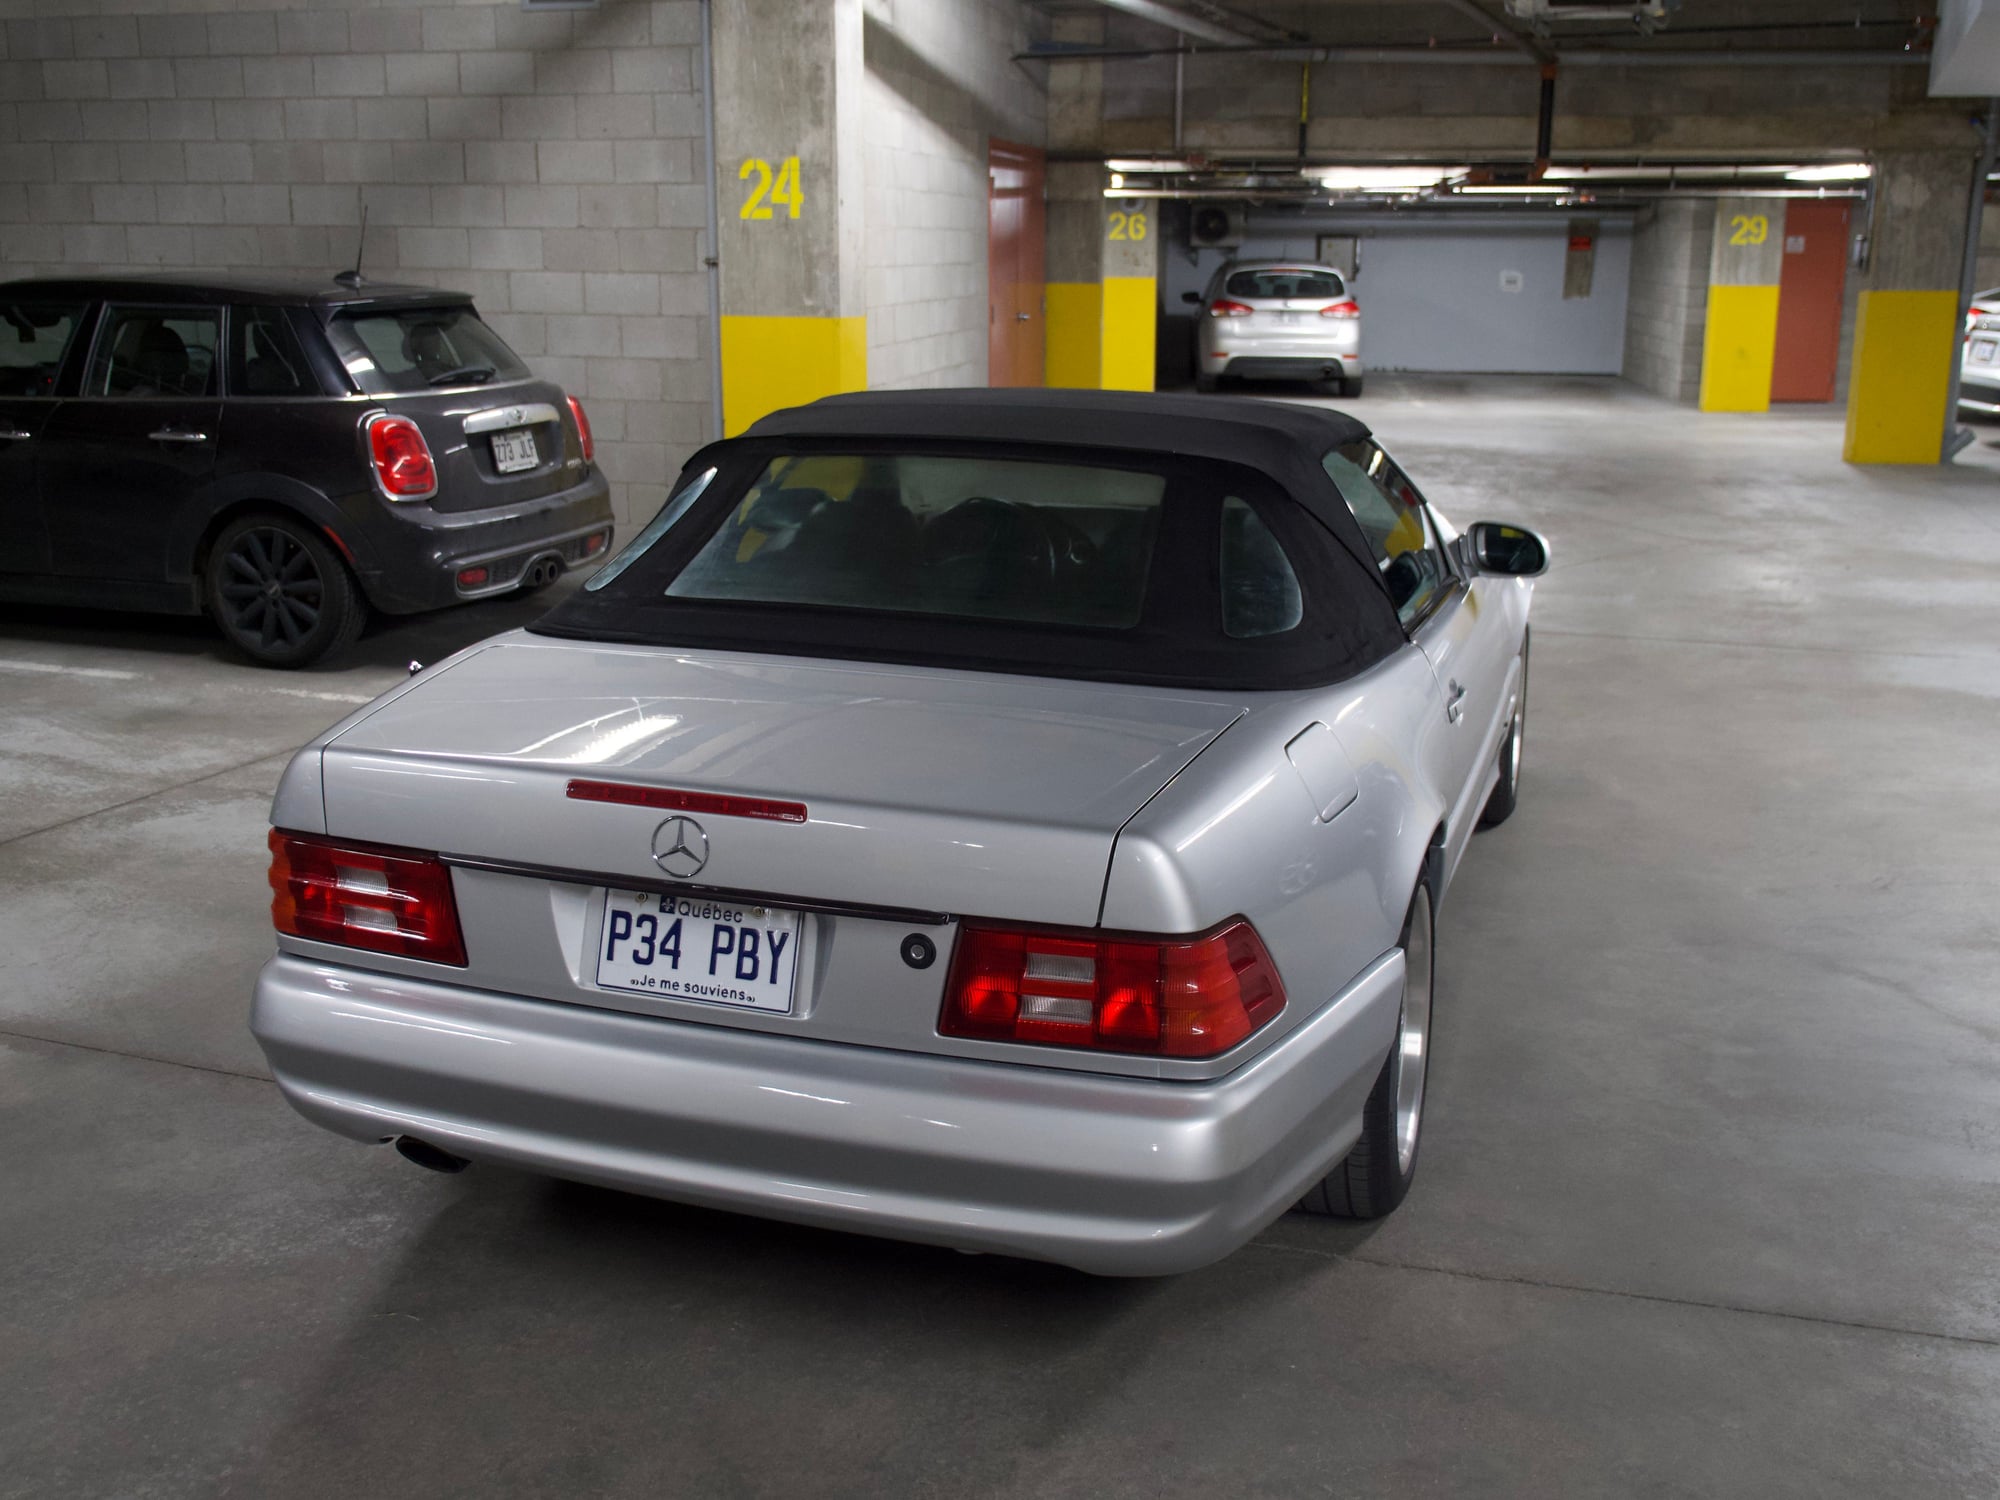 1999 Mercedes-Benz SL500 - 1999 Mercedes SL500 Sport (AMG package) with PANORAMIC SUNROOF - Used - VIN WDBFA68F4XF183900 - 148,864 Miles - 8 cyl - 2WD - Automatic - Convertible - Gray - Montréal, QC H2Y 1A, Canada